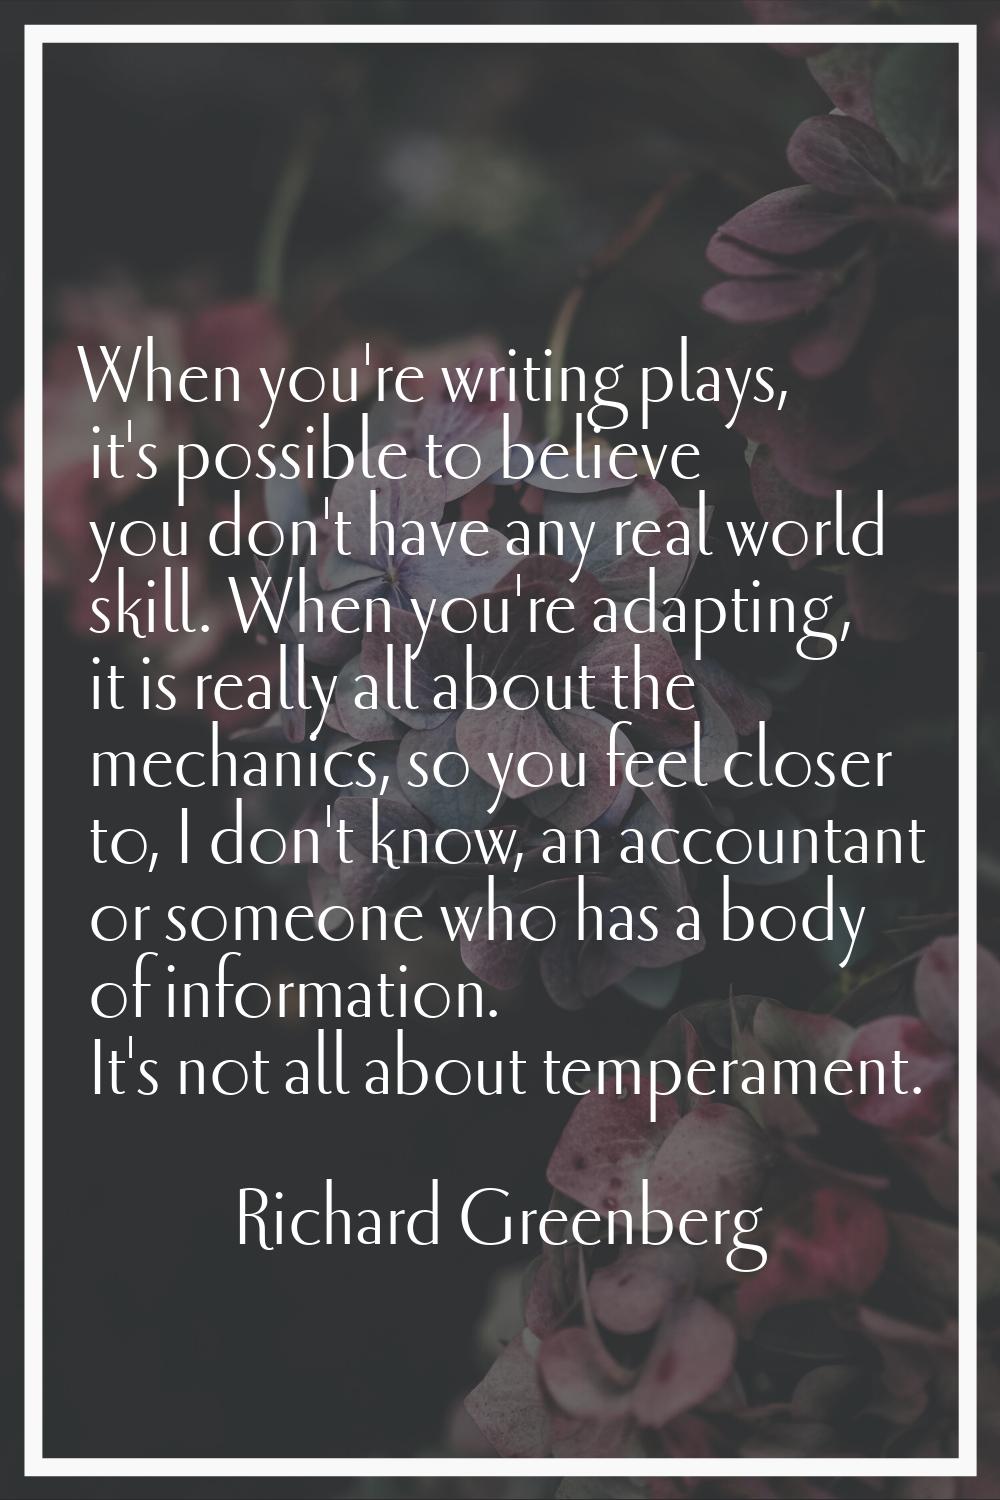 When you're writing plays, it's possible to believe you don't have any real world skill. When you'r